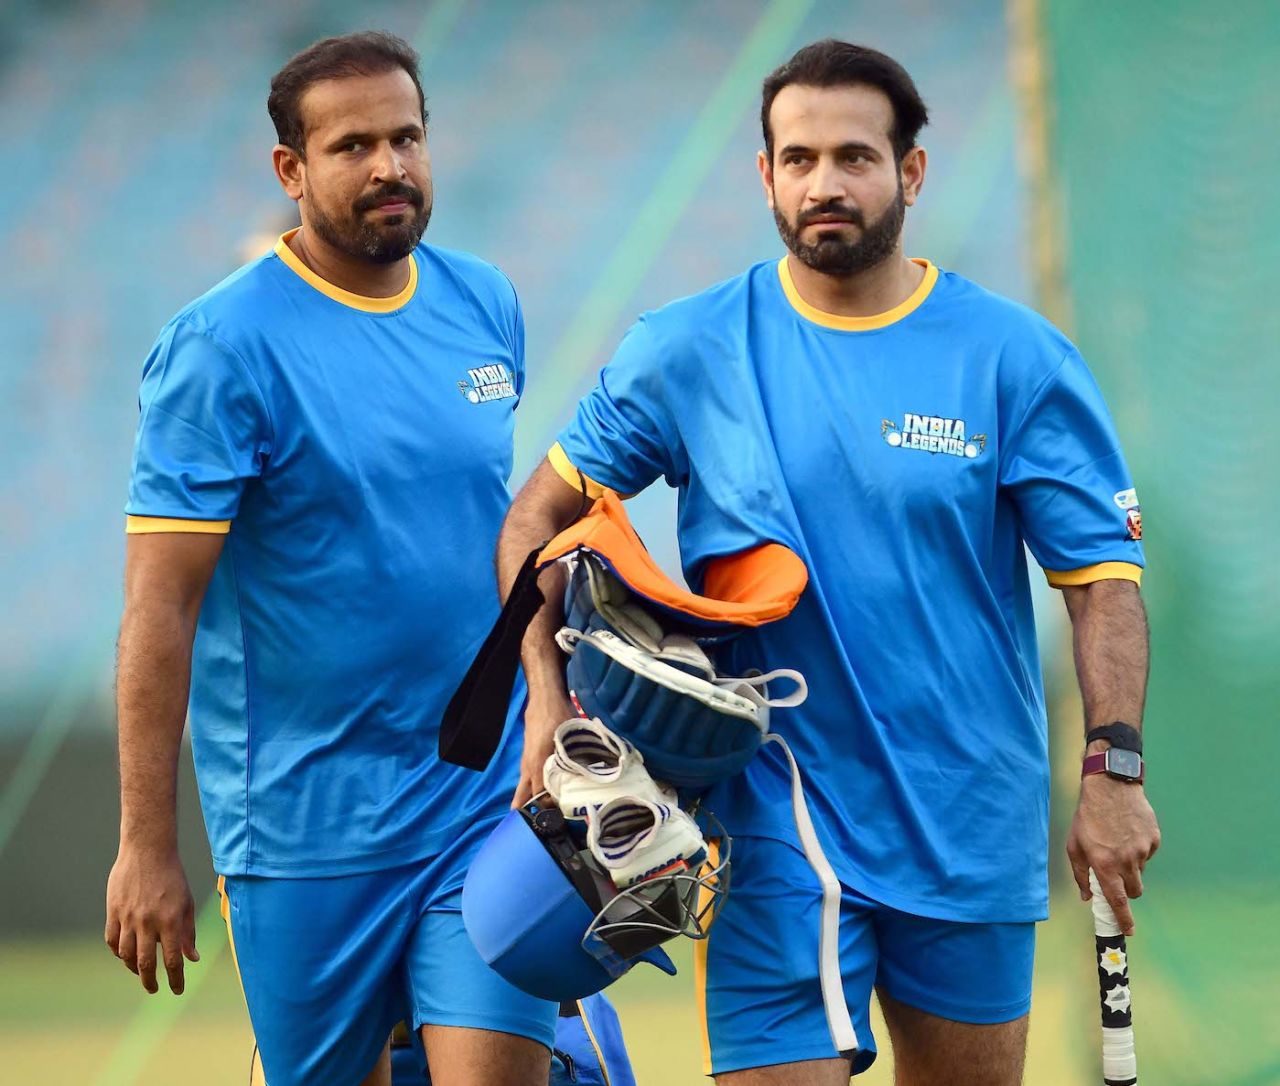 Brothers Yusuf and Irfan Pathan arrive to train in the nets, Road Safety World Series, Raipur, March 4, 2021